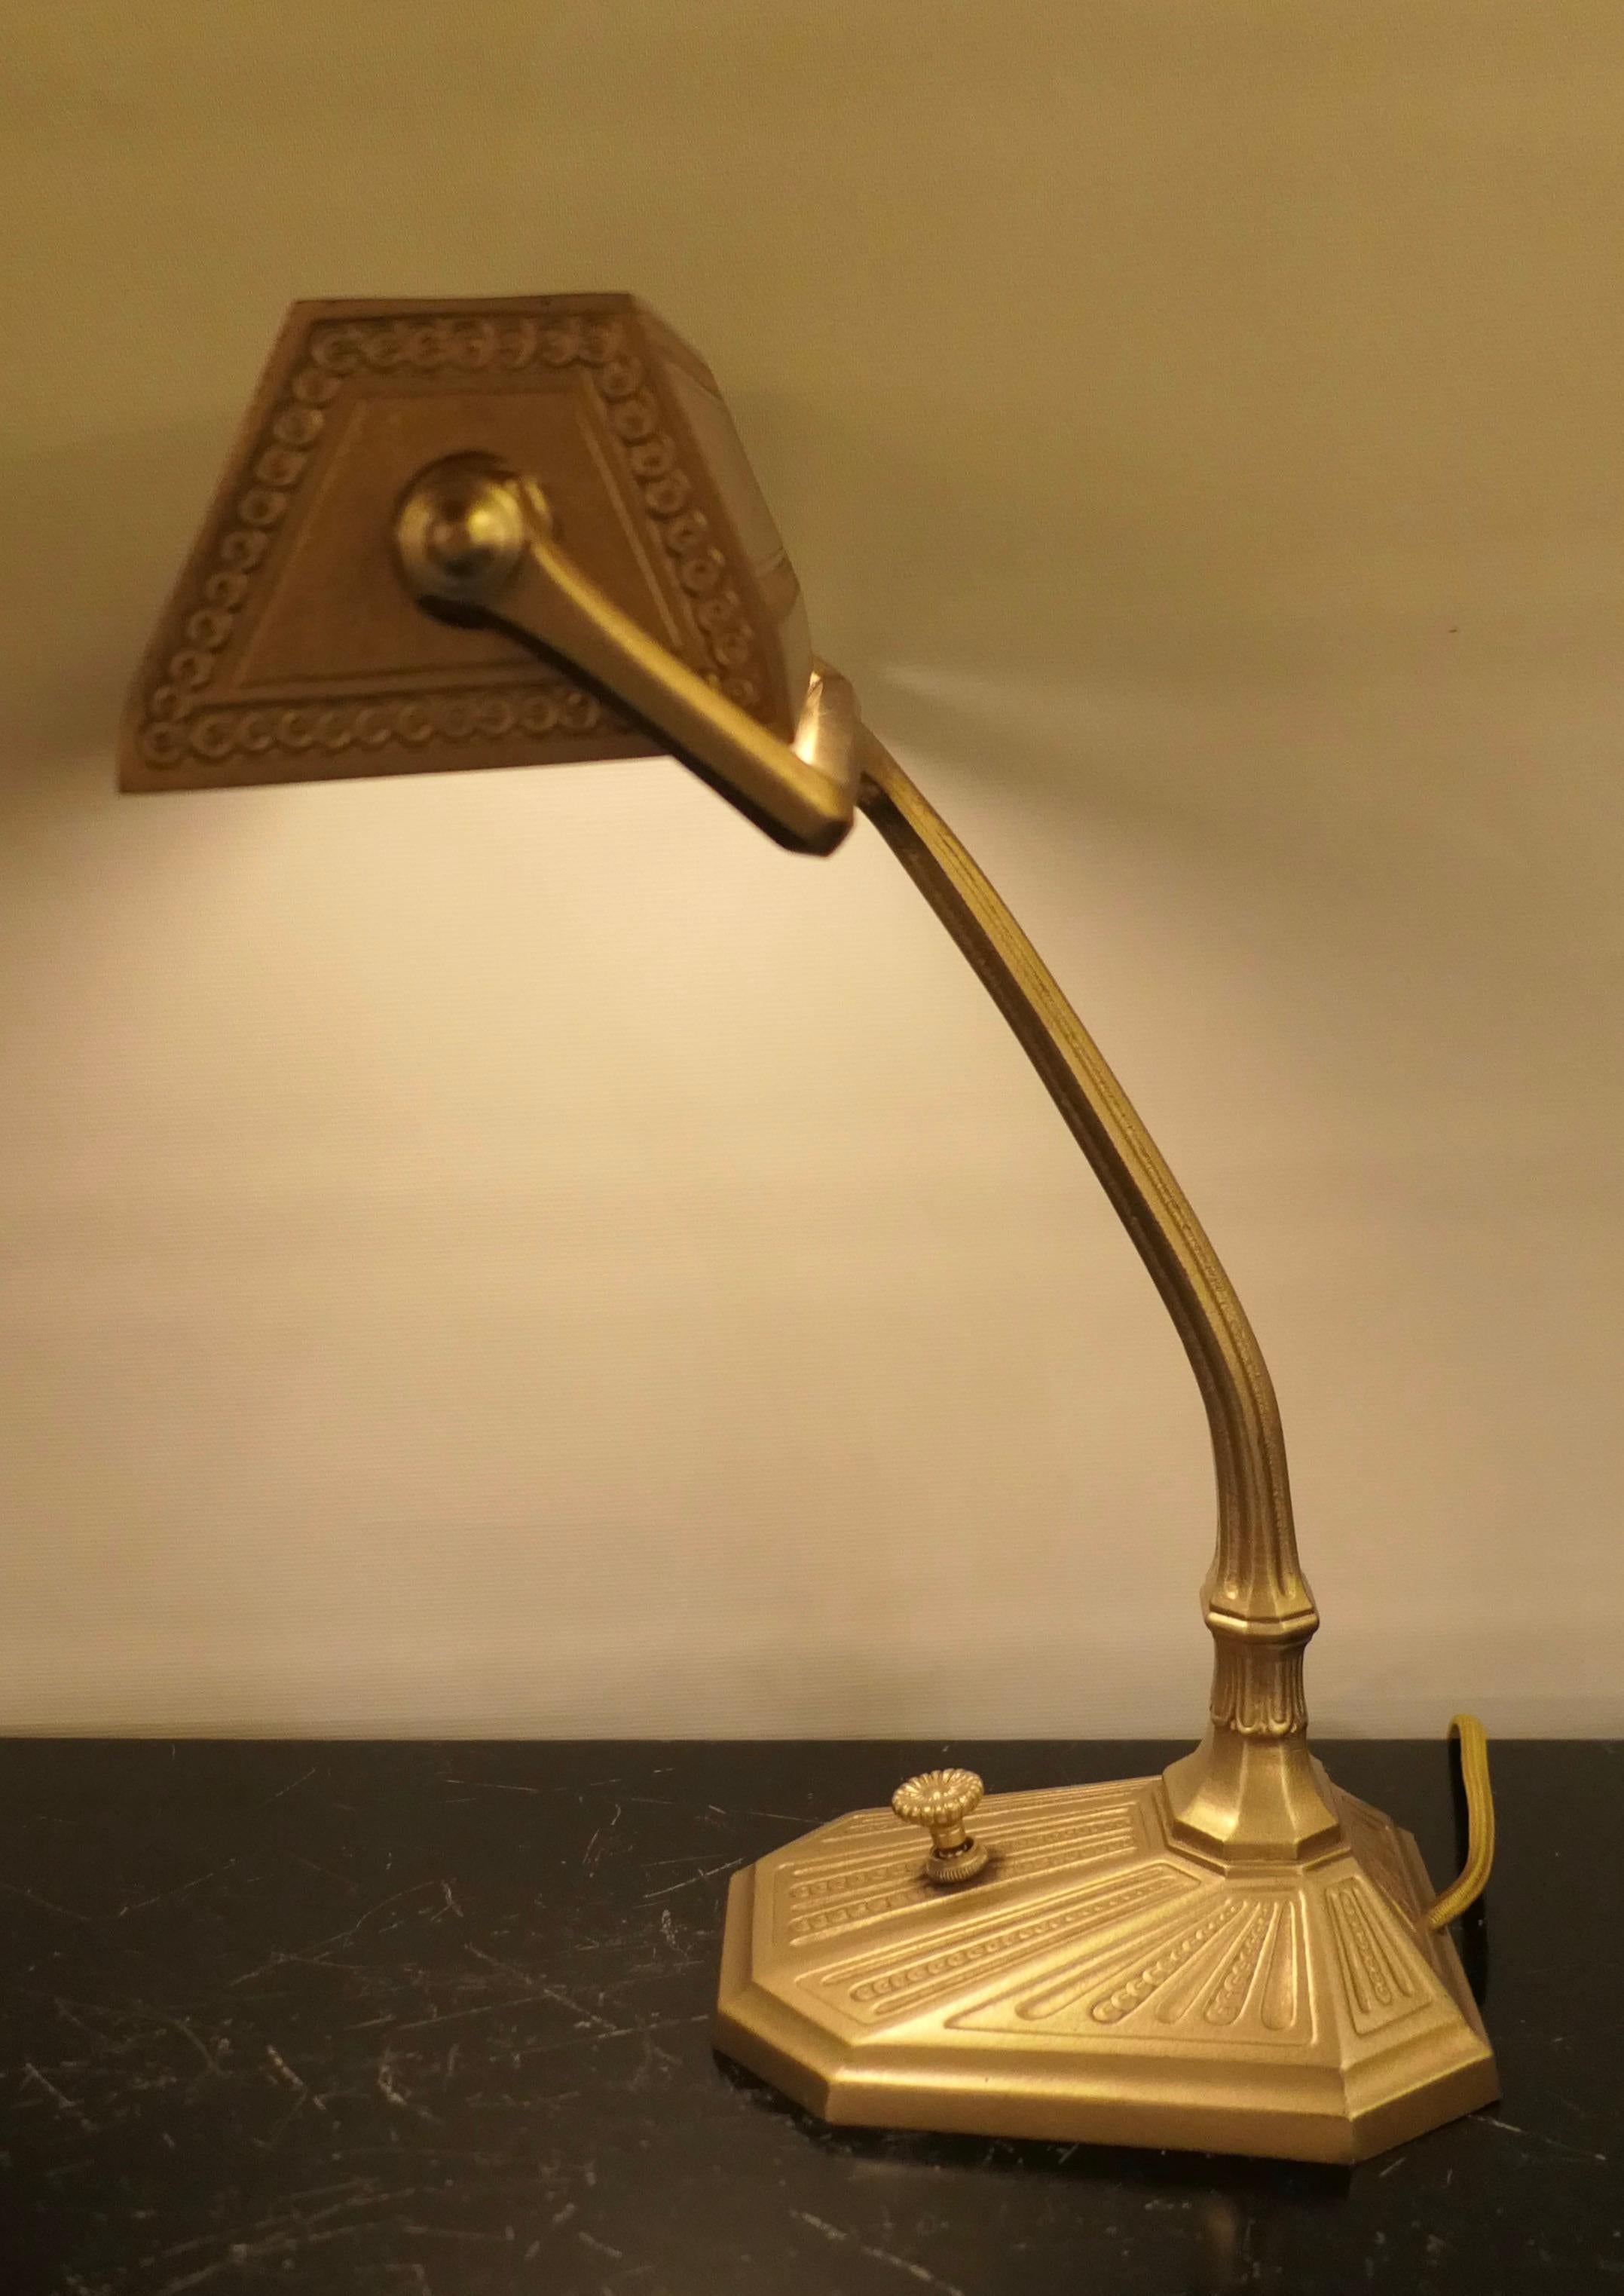 This original Tiffany Studios, New York desk lamp dates from the 1920’s. It presents in gold dore’ bronze & has an Art Deco motif. It is signed “Tiffany Studios, New York” & numbered “694”. The lamp is newly rewired & is in very good condition.